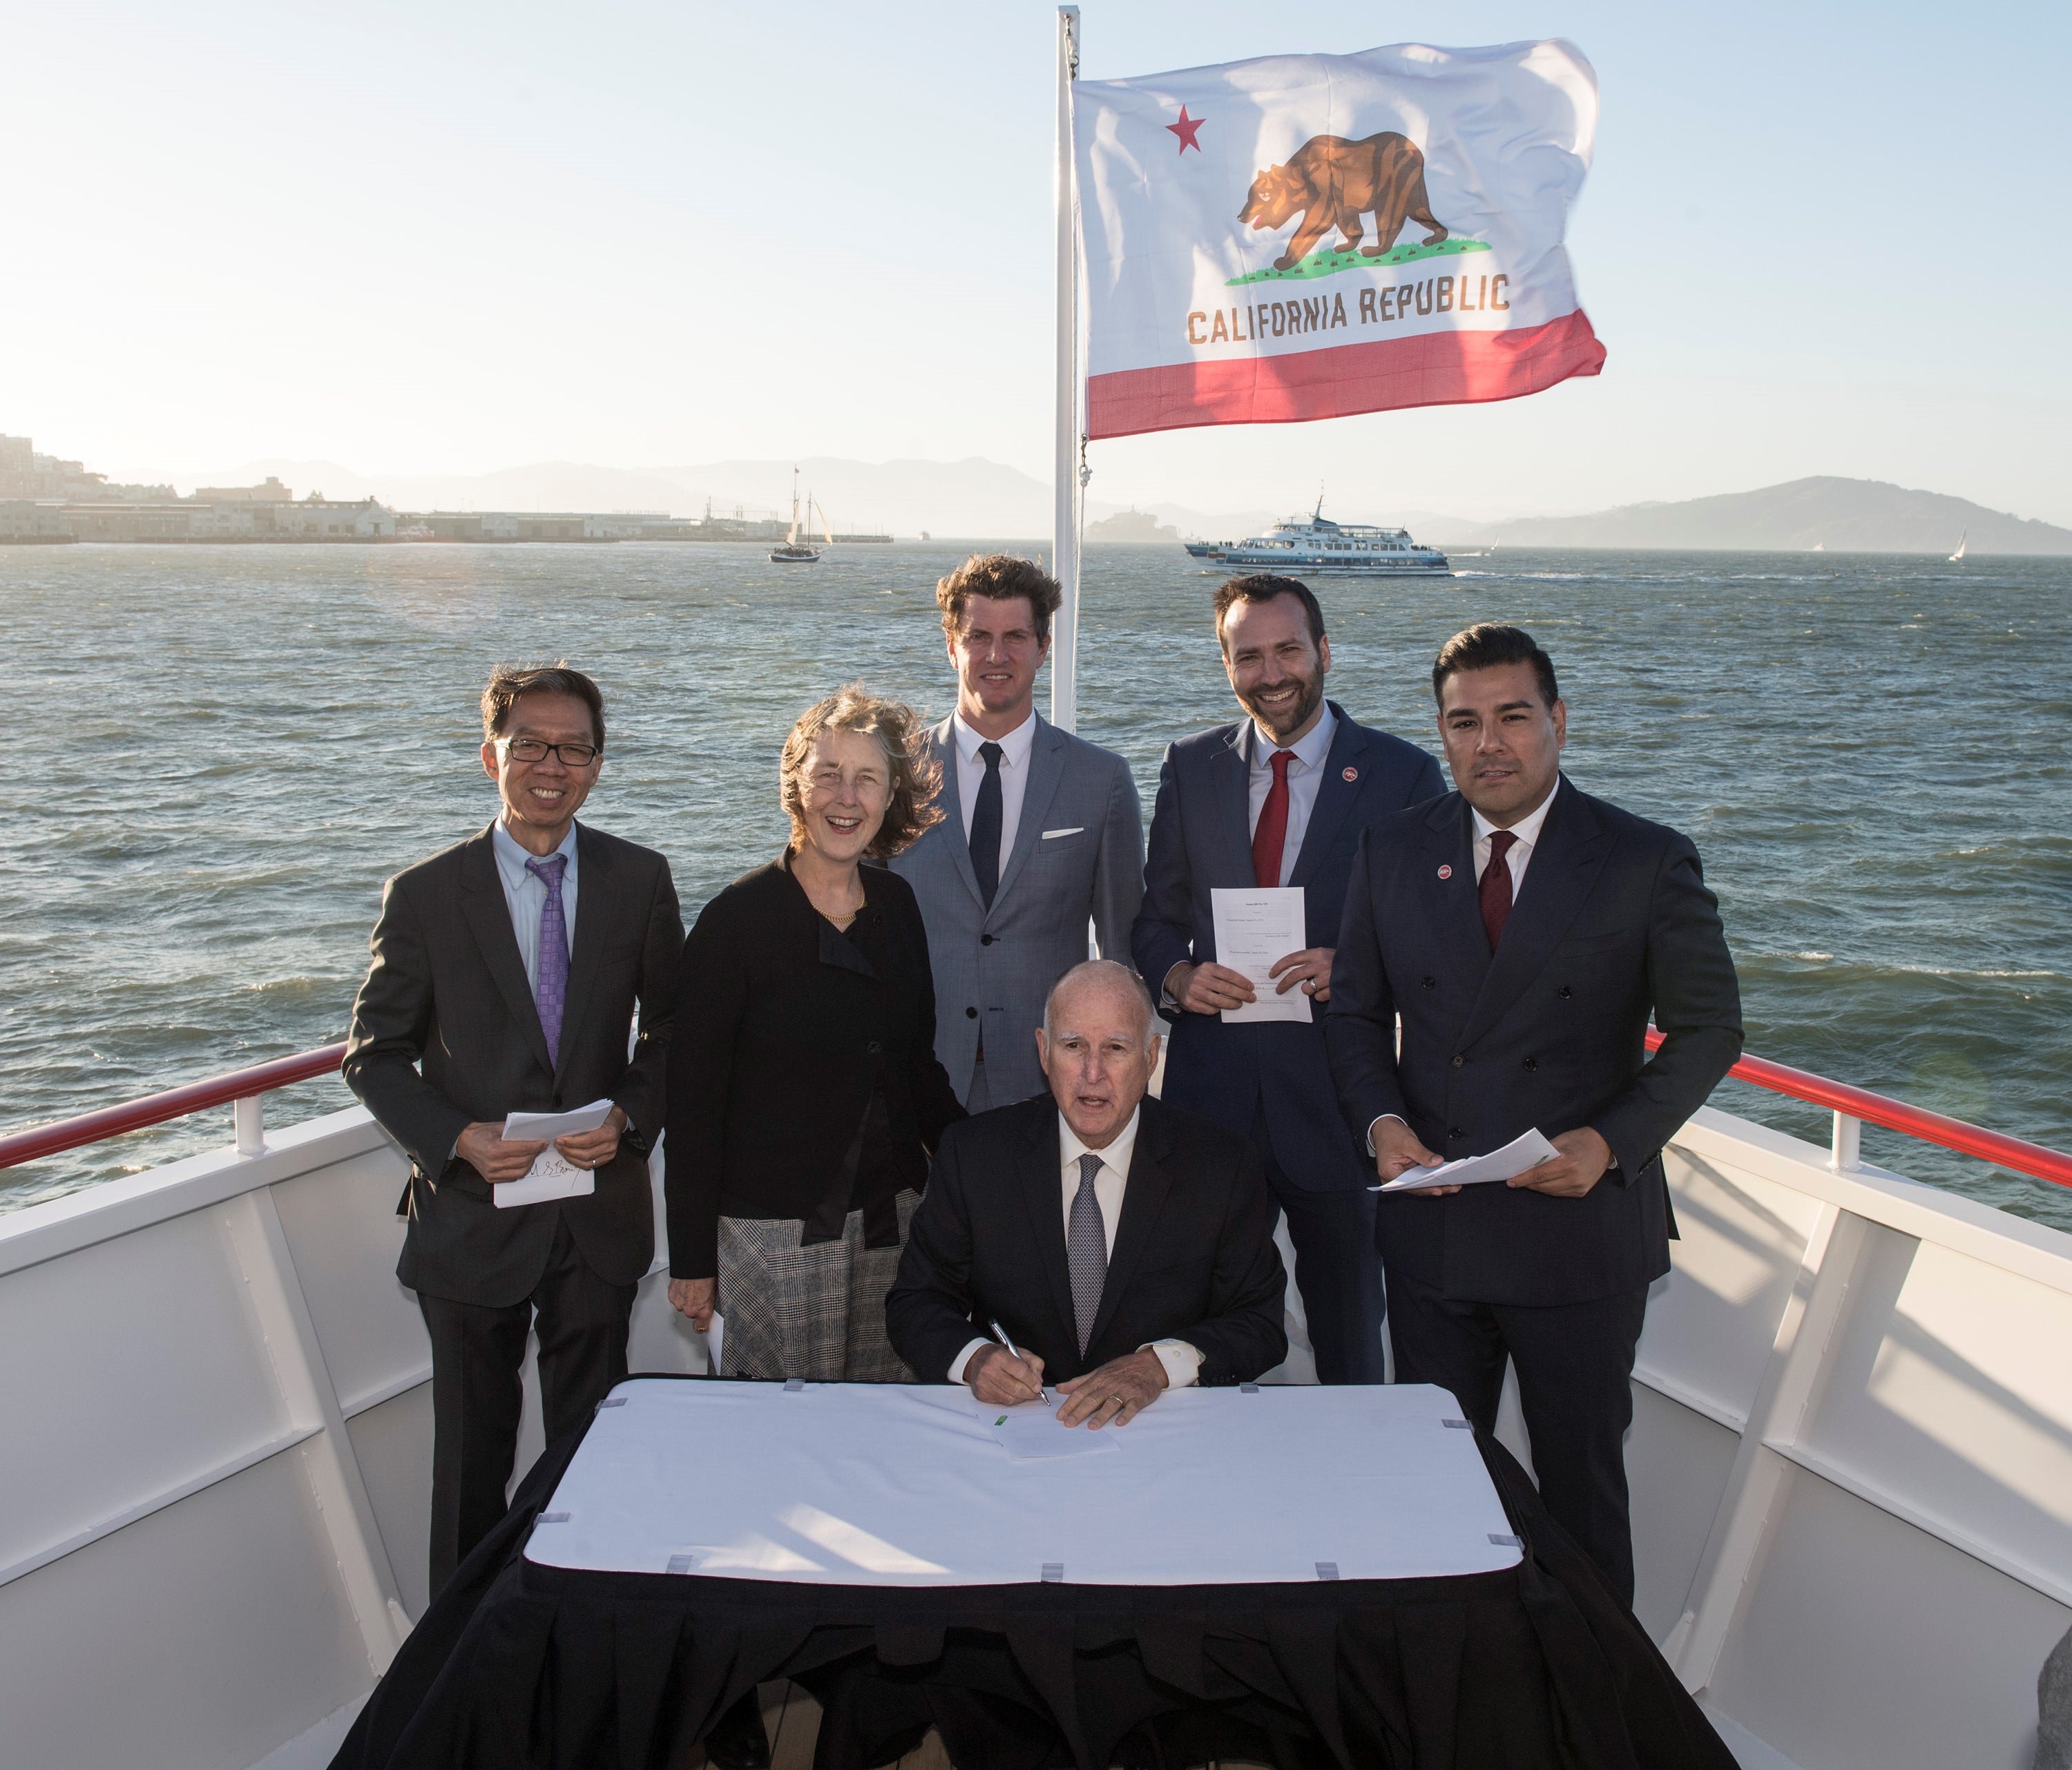 Aboard Hybrid Electric Ferry on the San Francisco Bay, Governor Brown Signs Bills to Promote Zero-Emission Vehicles, Reduce Carbon Emissions